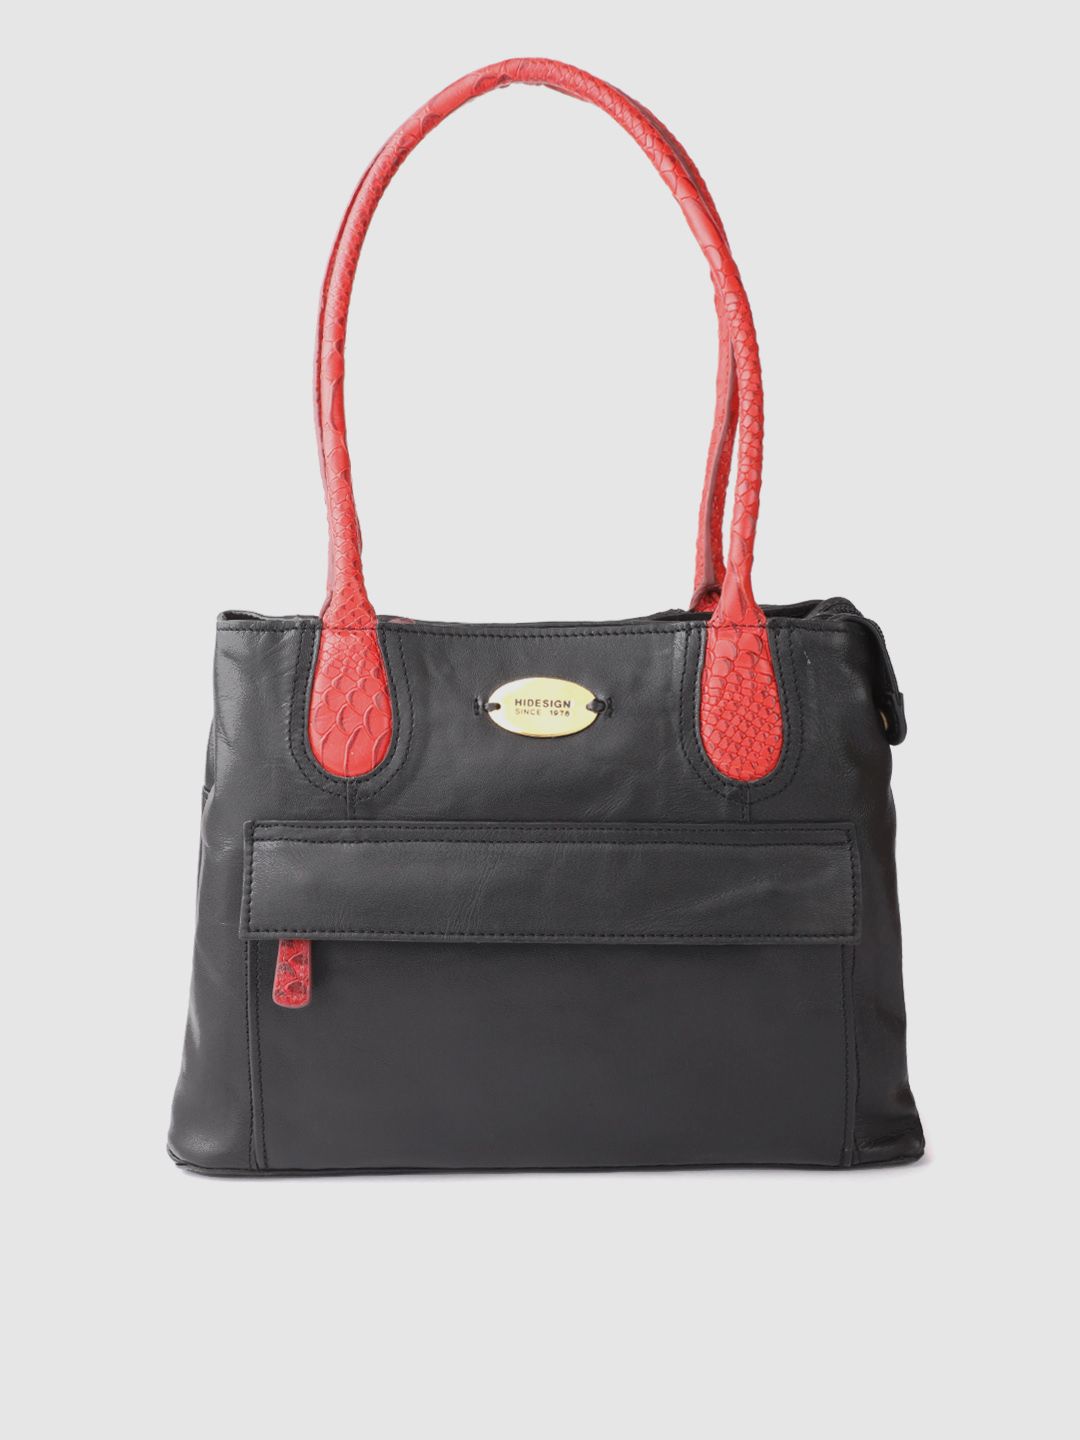 Hidesign Black Solid Leather Handcrafted Structured Shoulder Bag Price in India